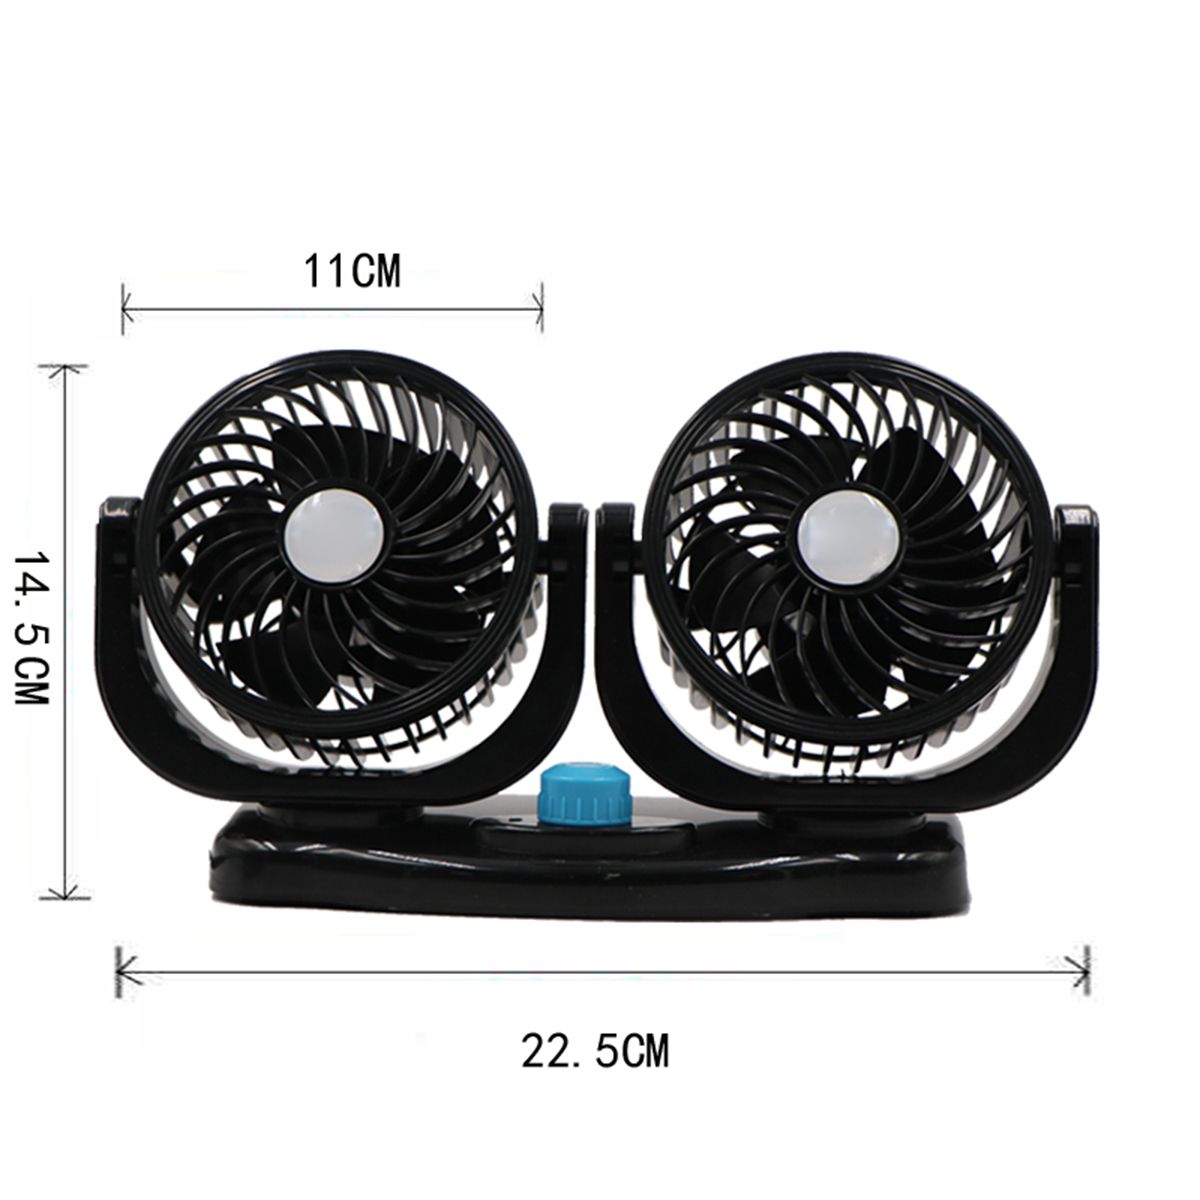 Dual-Head-12V-Car-Fan-Portable-Vehicle-Truck-360-Degree-Rotatable-Auto-Cooling-Cooler-1181625